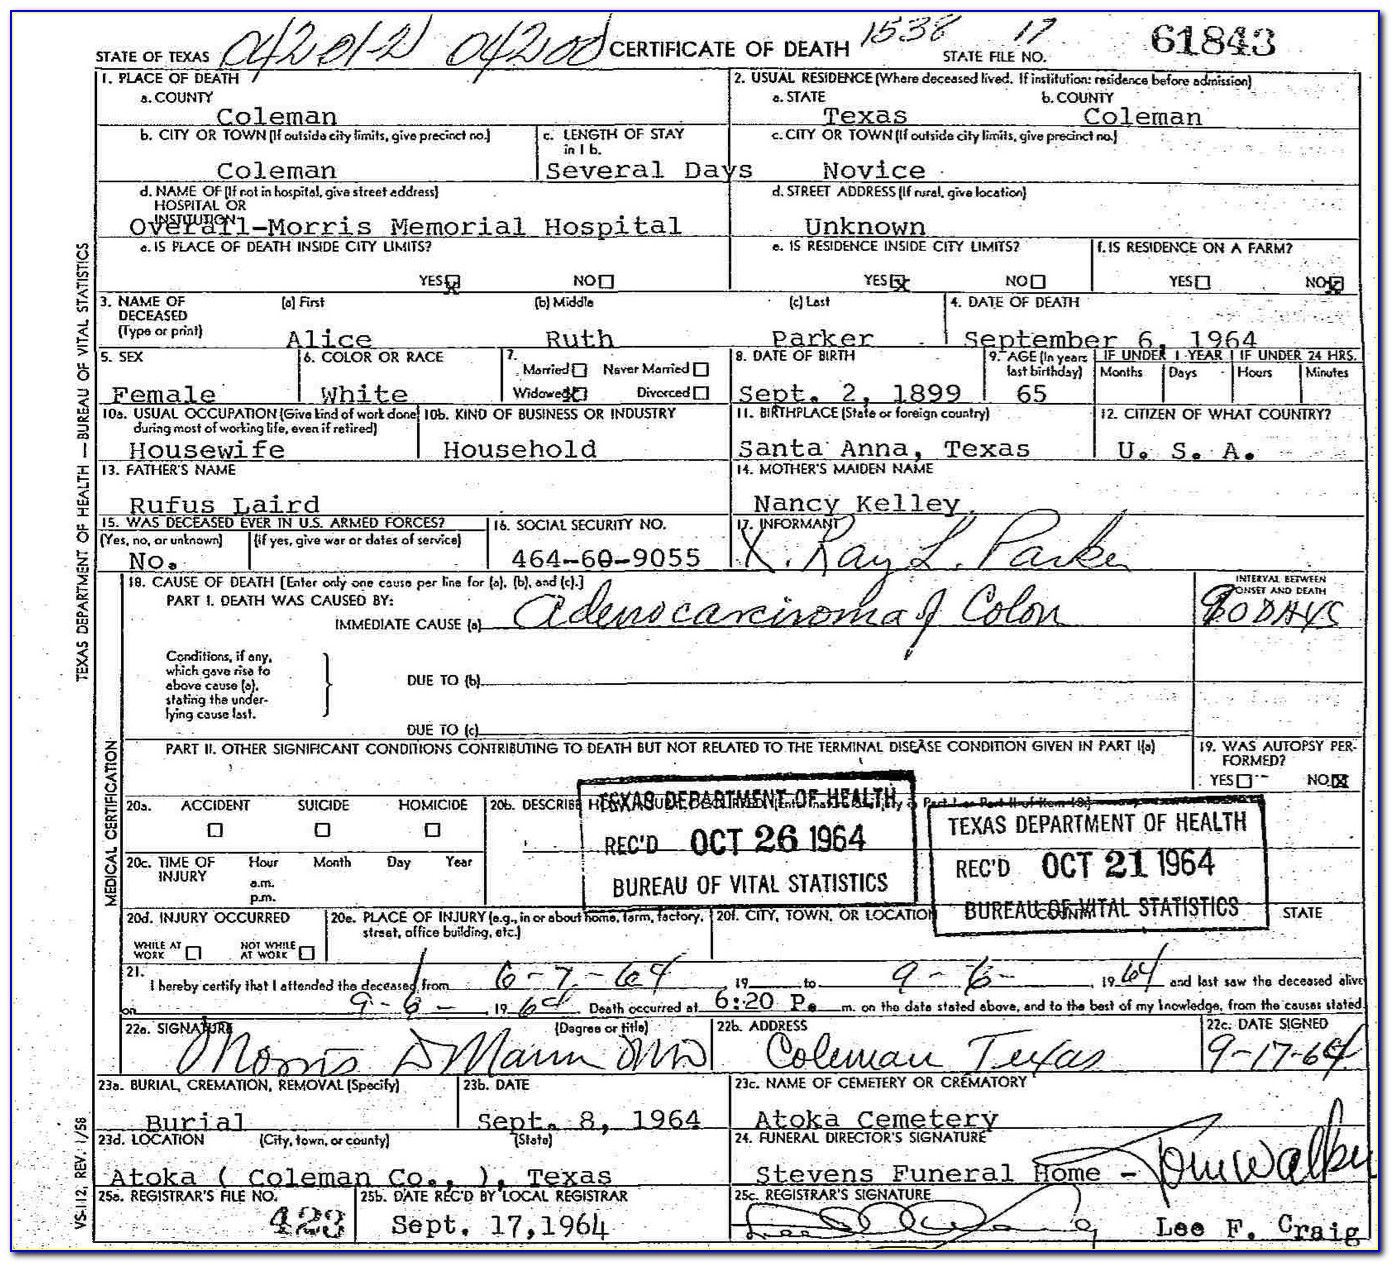 Denton County Courthouse Birth Certificate